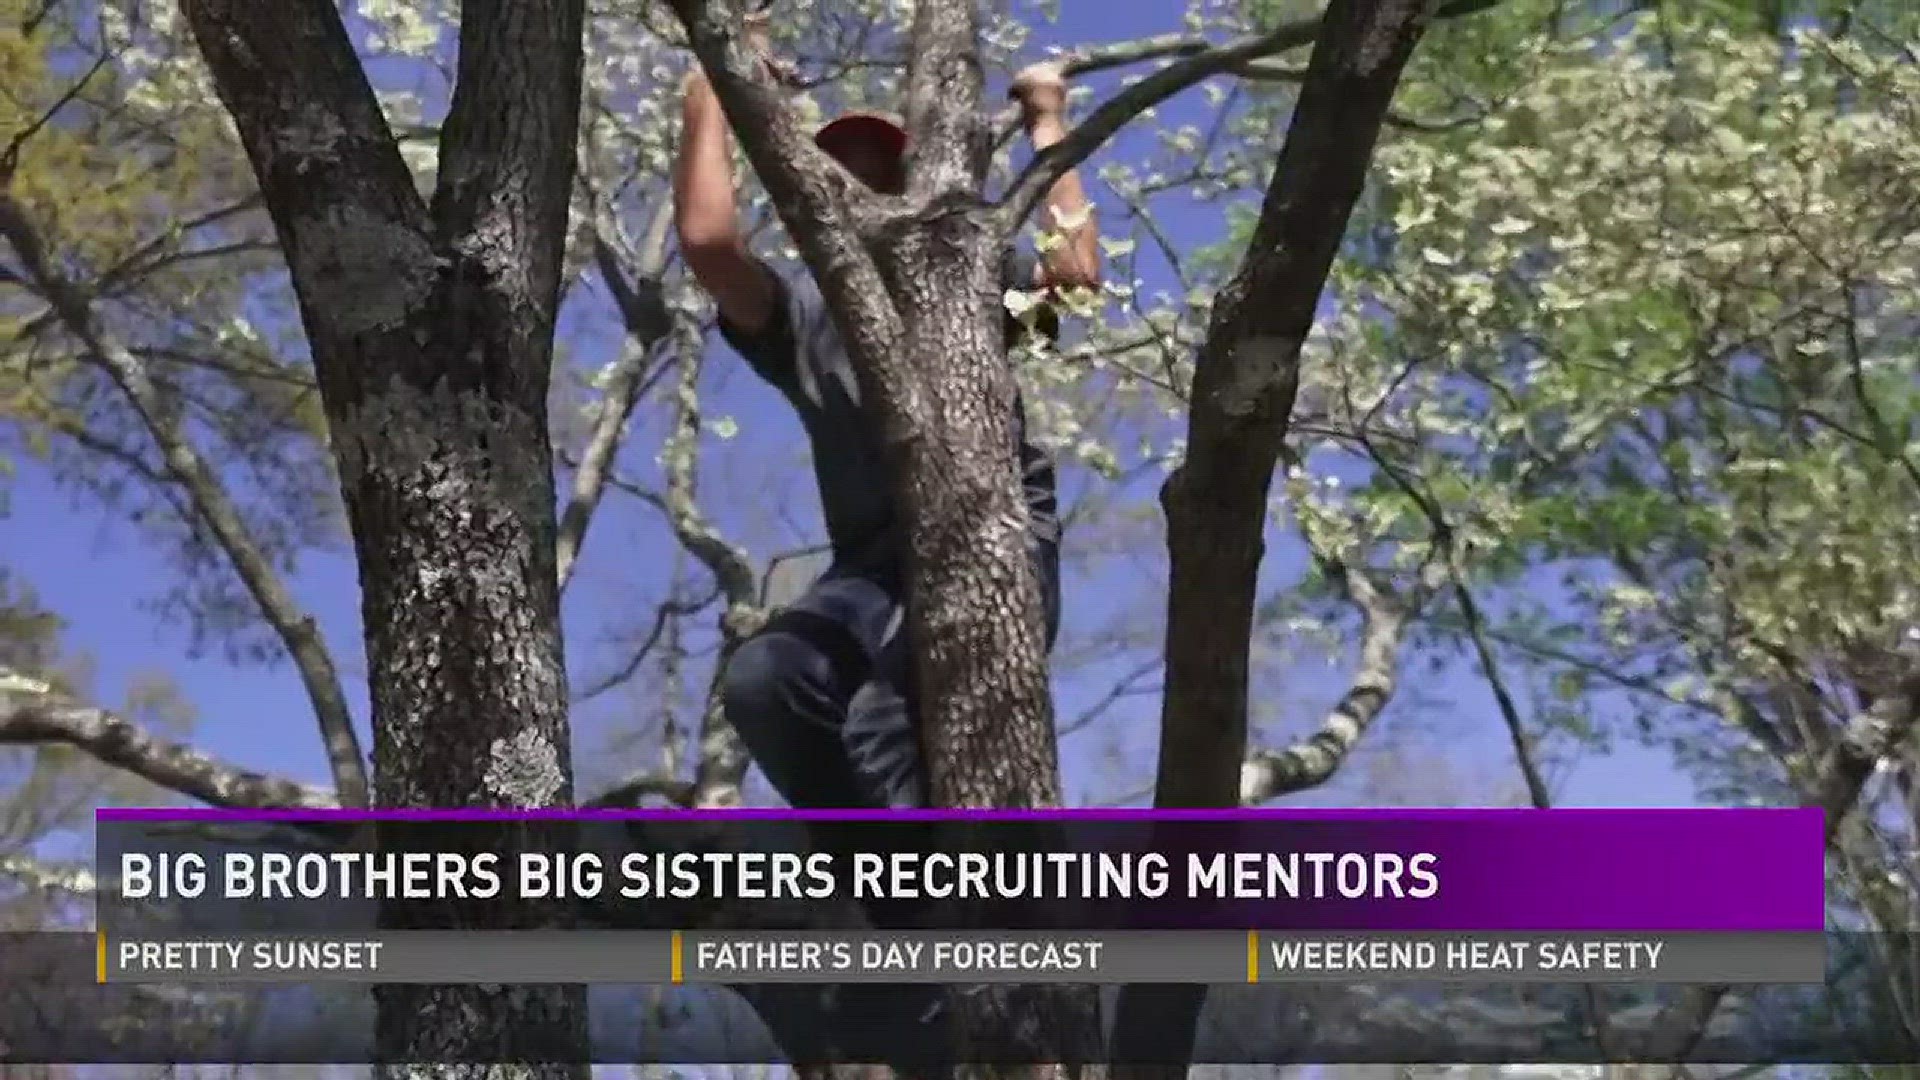 After waiting a year, an 11-year-old is getting a big brother surprise!This after the organization is trying to recruit 100 mentors in 100 days.